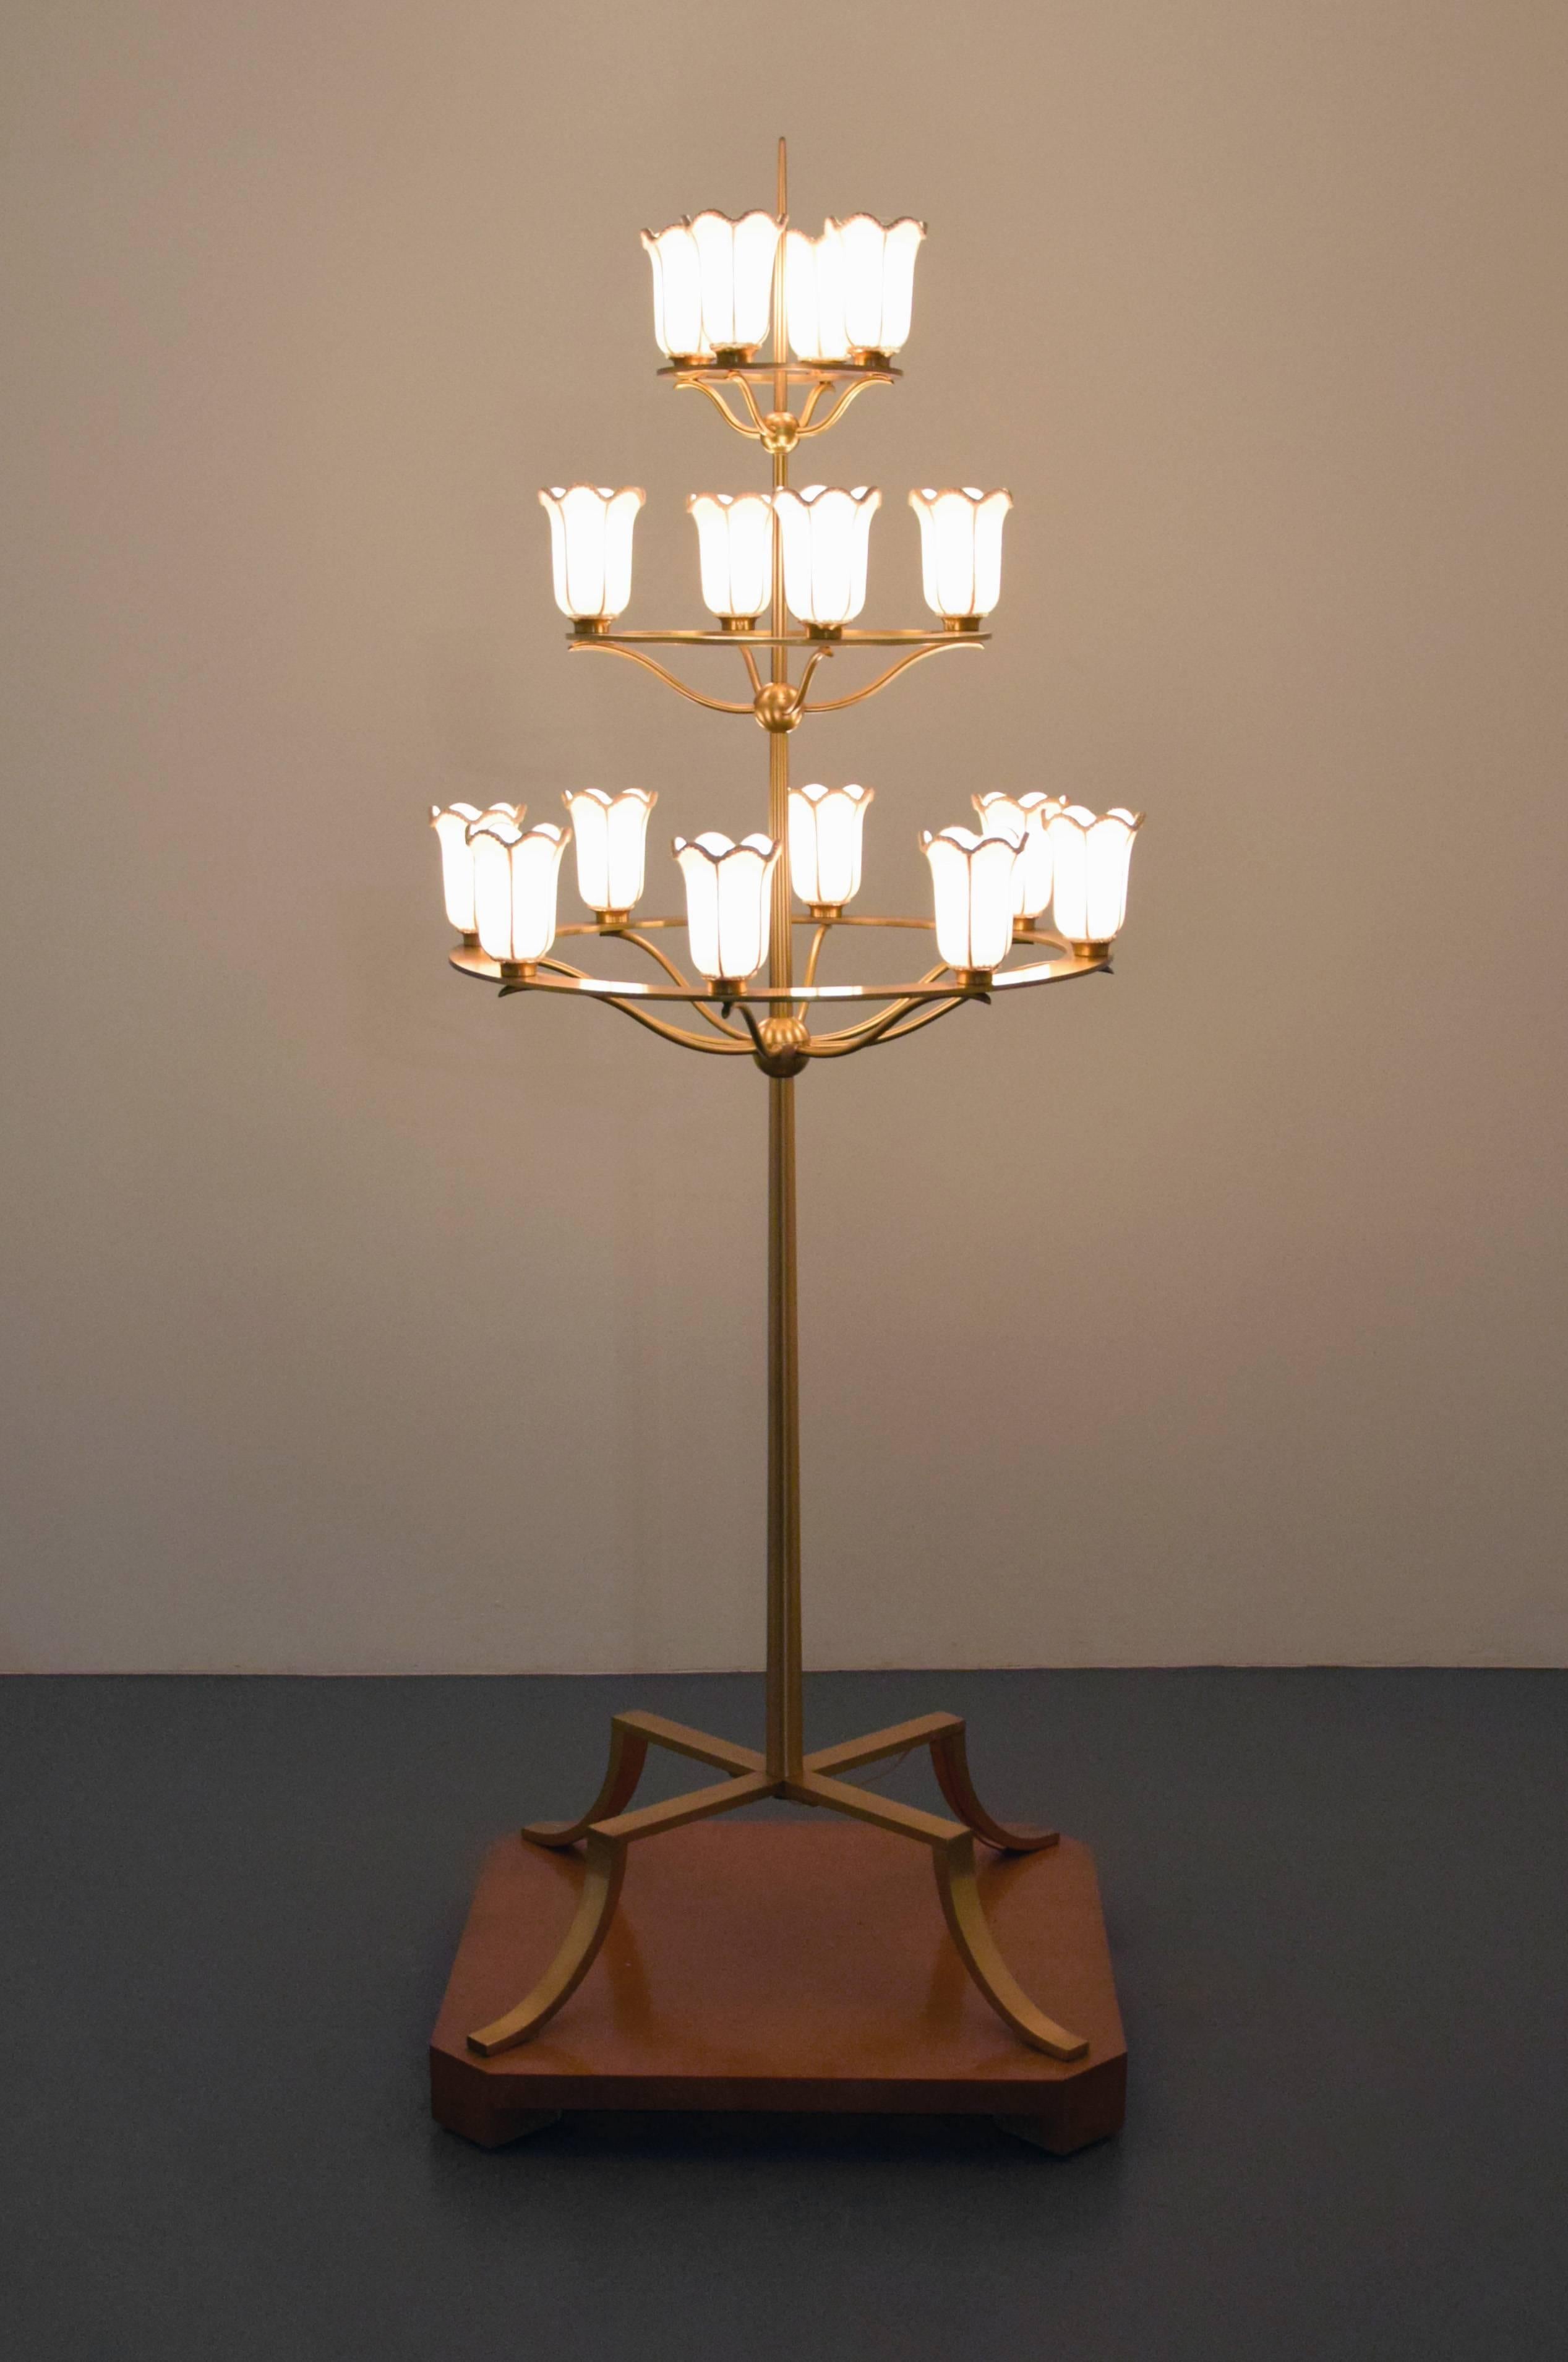 Three-tiered floor lamp with sixteen light sockets designed by T.H. Robsjohn-Gibbings. The lamp is depicted in situ within the book Mr. Tom Davis, White Shadows, Palm Springs, pg. 9. Provenance: Designed by Robsjohn-Gibbings for White Shadows,